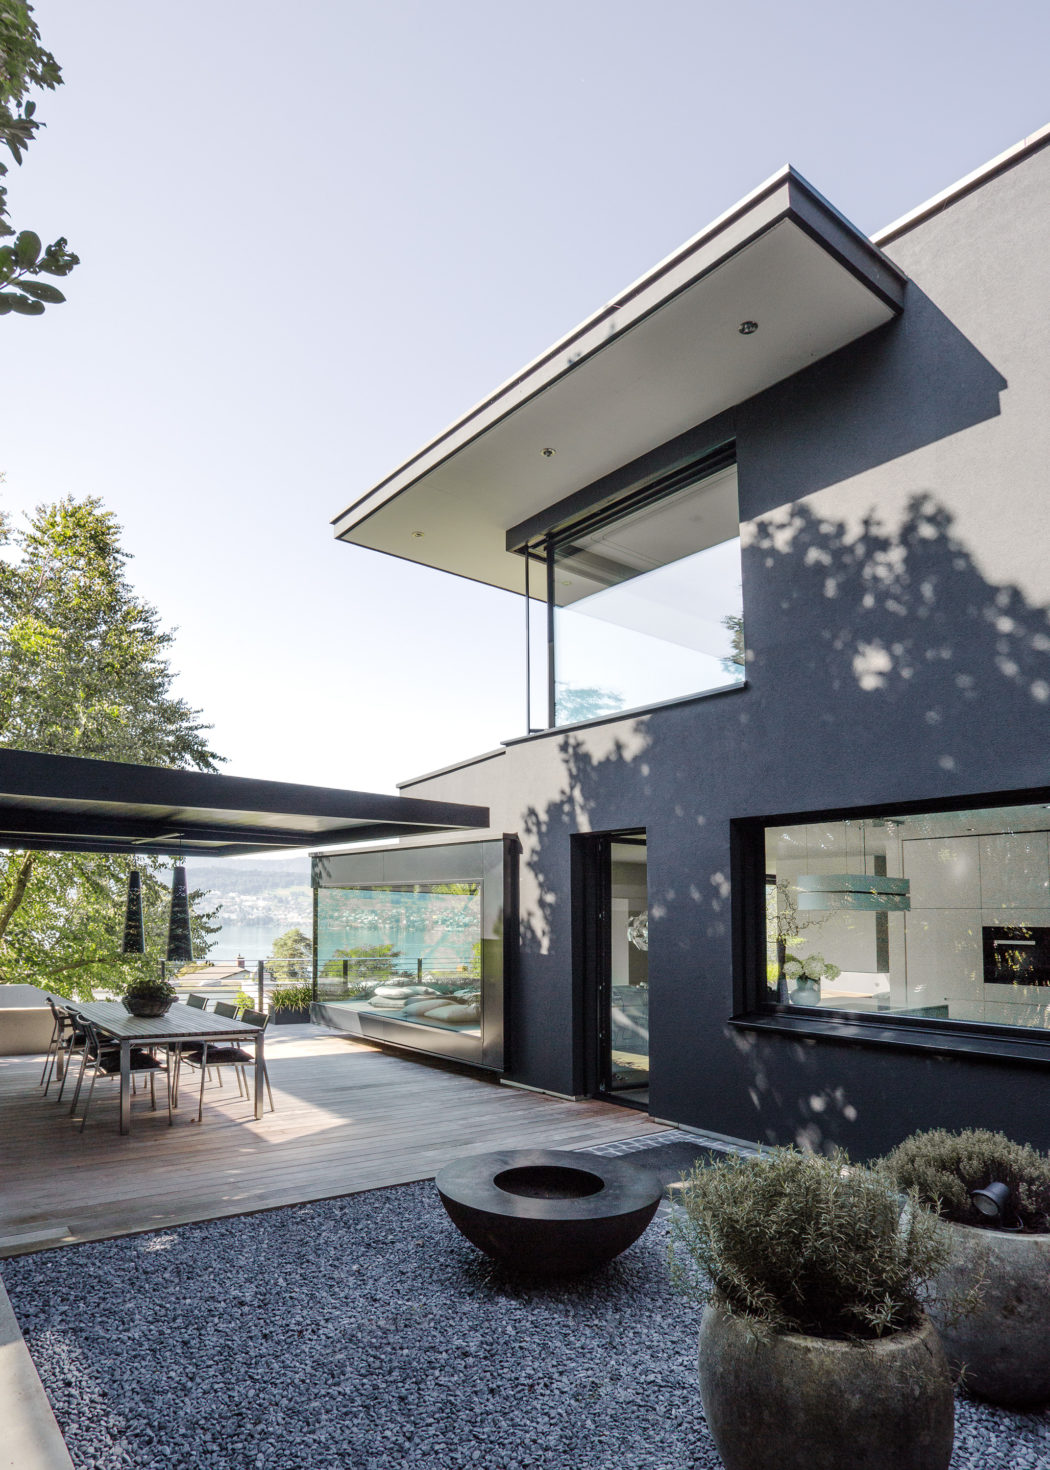 Sleek, modern architectural design with expansive glass walls, angled roofs, and a cozy outdoor patio.